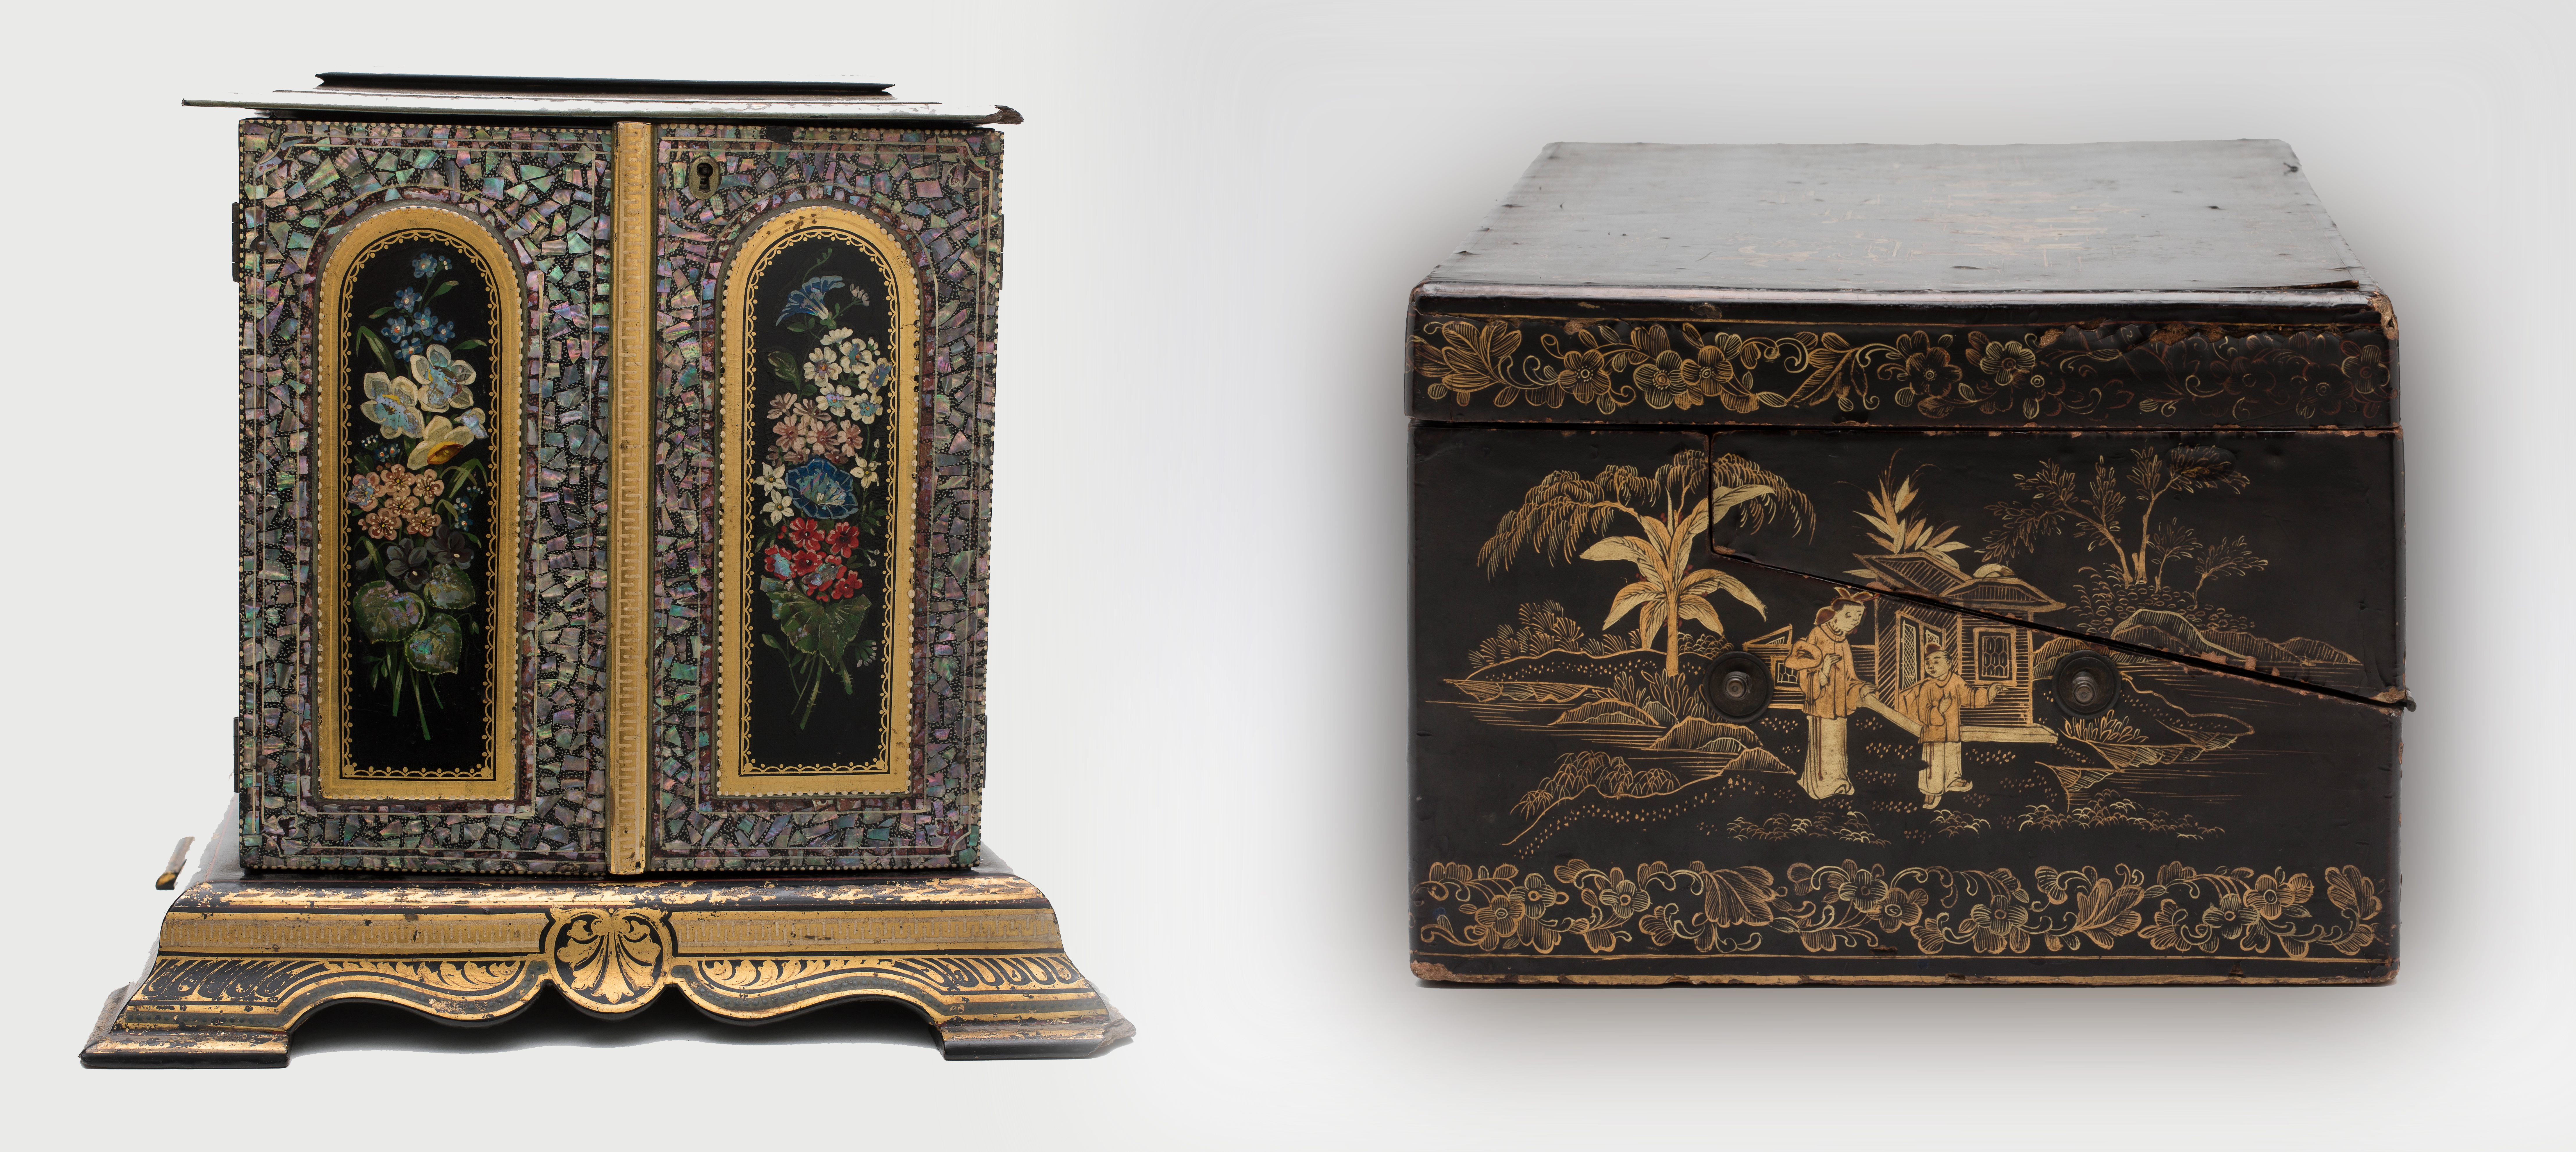 Two object images showing European made jaappned cabinet and Chinese made lacquer writing box.